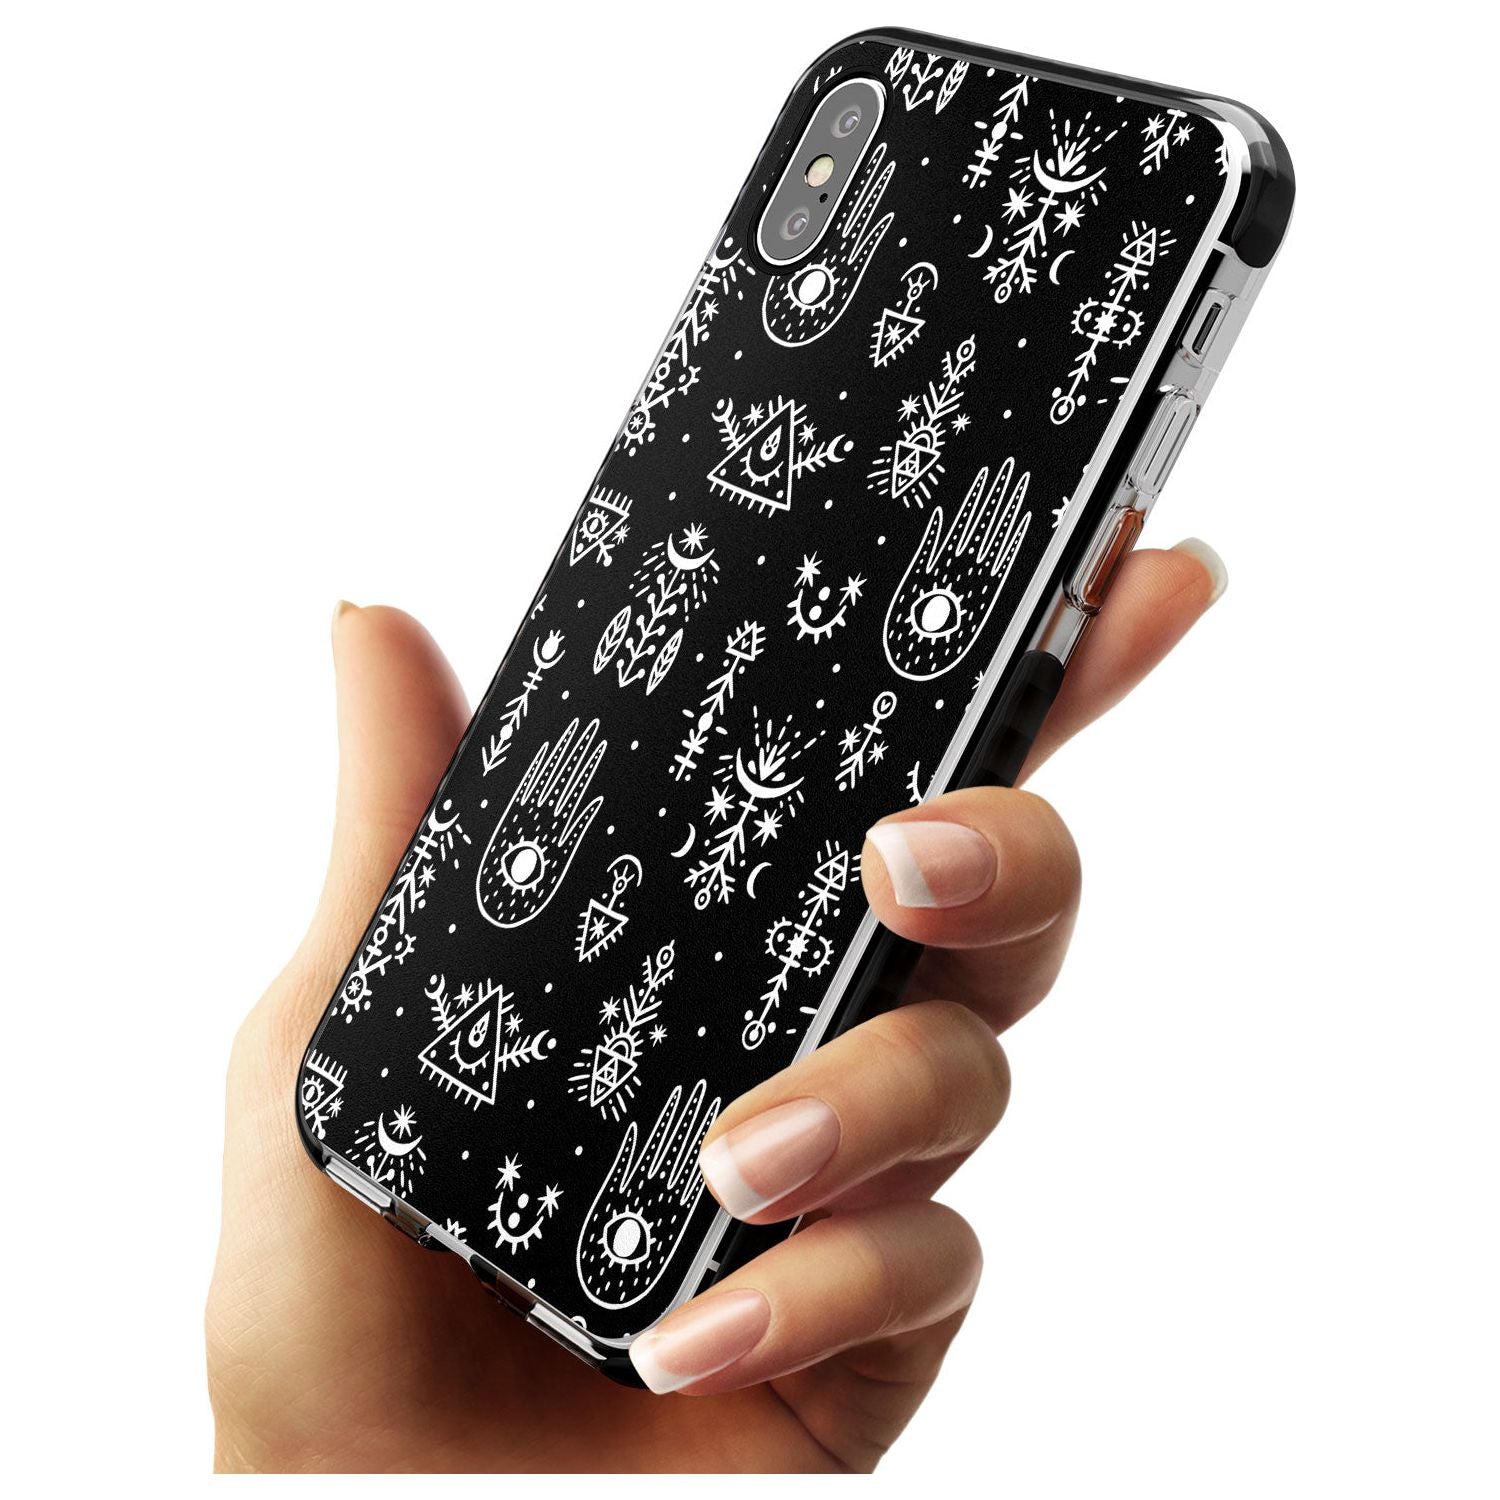 Tribal Palms - White on Black Black Impact Phone Case for iPhone X XS Max XR